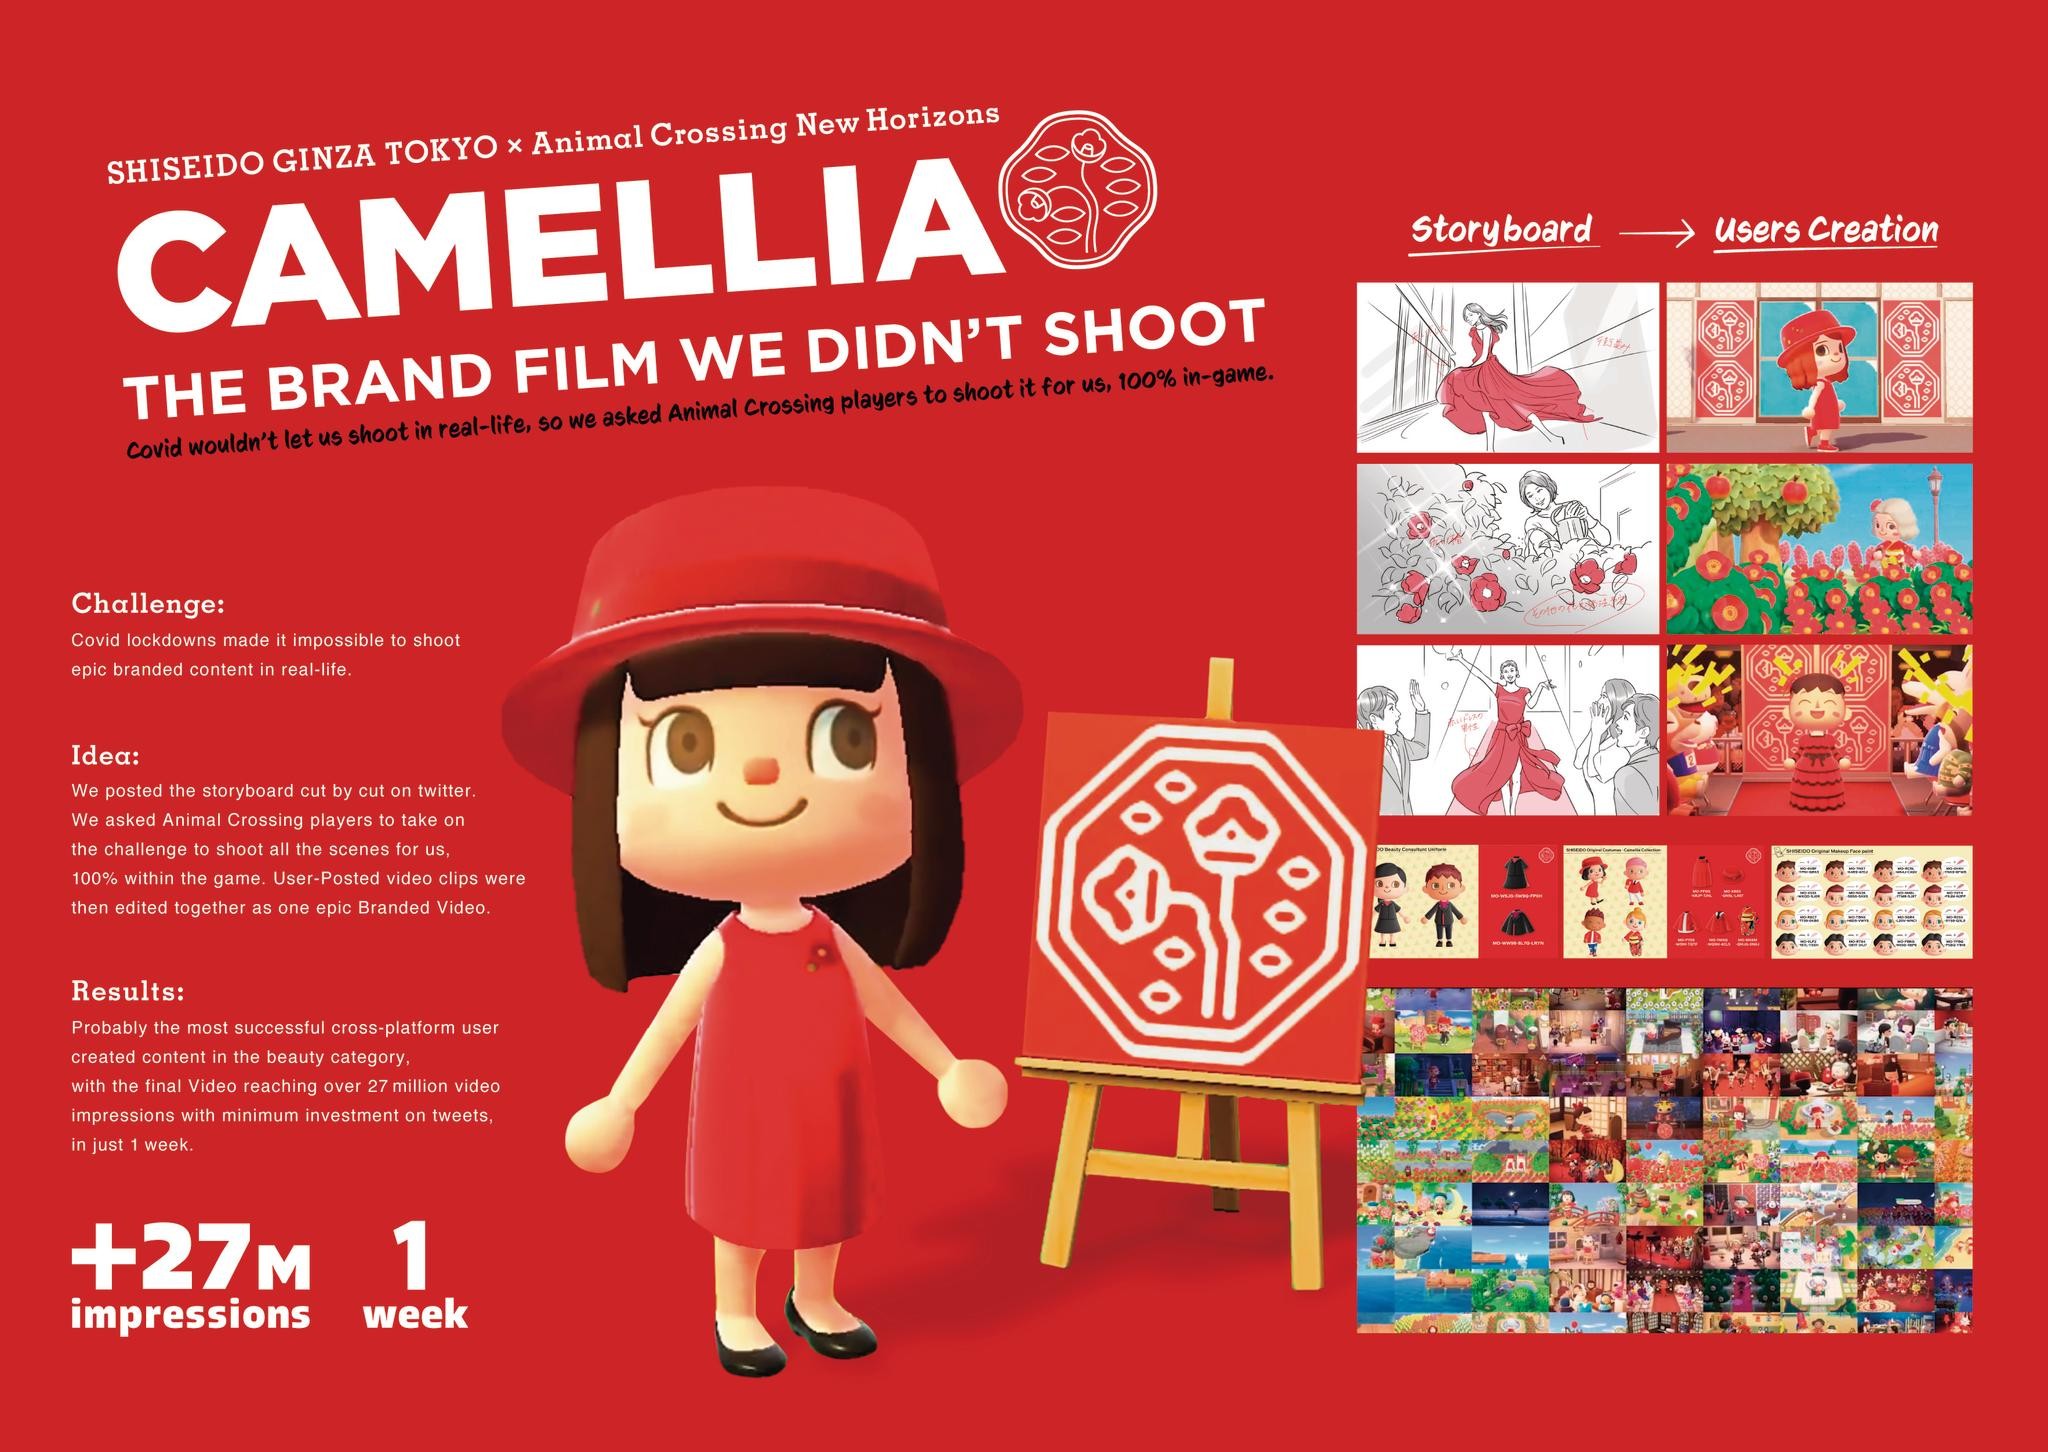 "Camellia" The brand film we didn't shoot